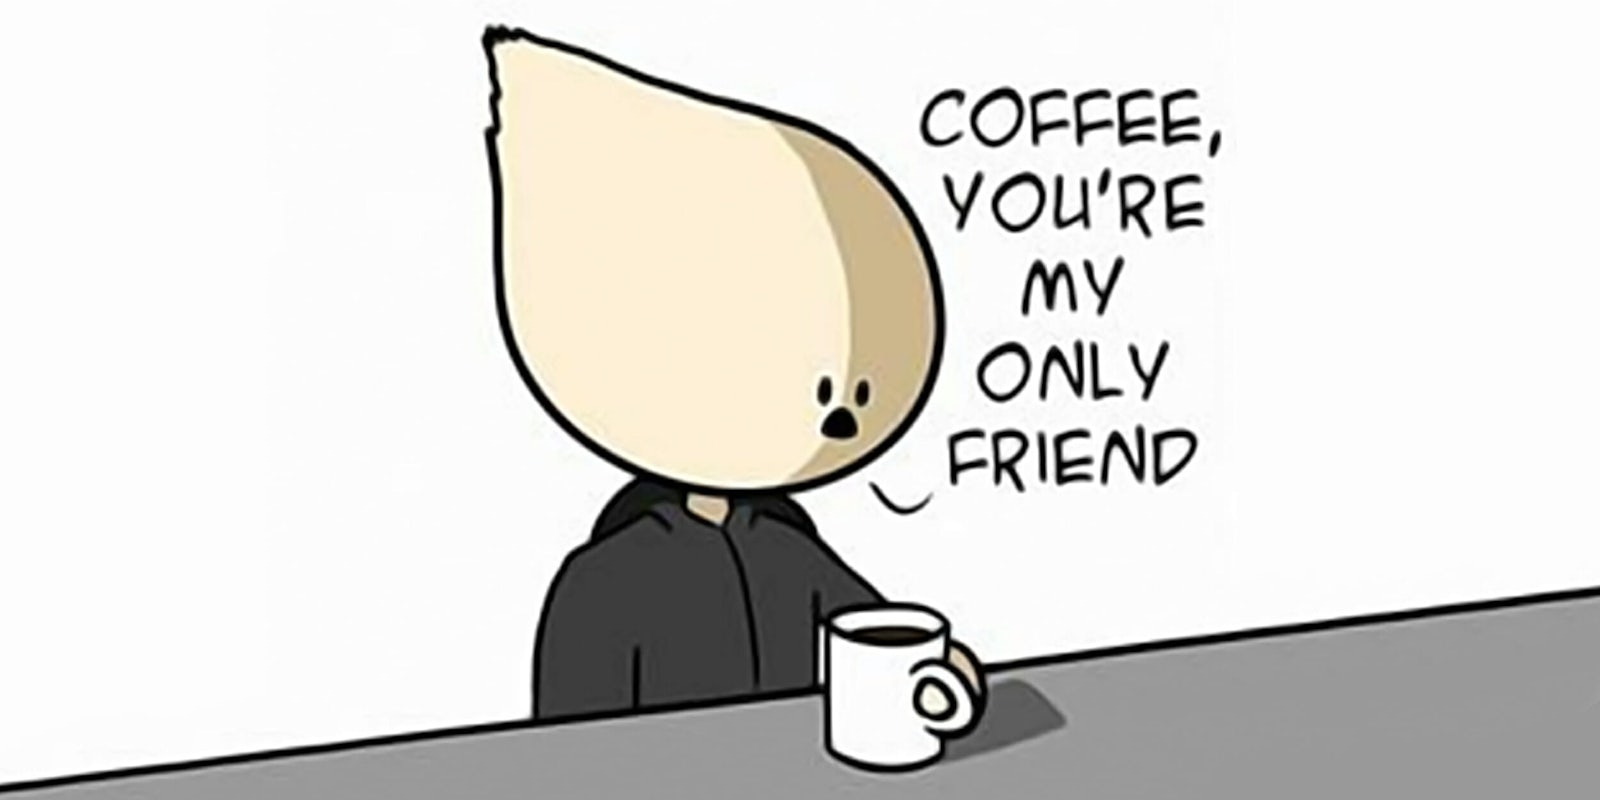 Coffee, you're my only friend meme by RaphComic